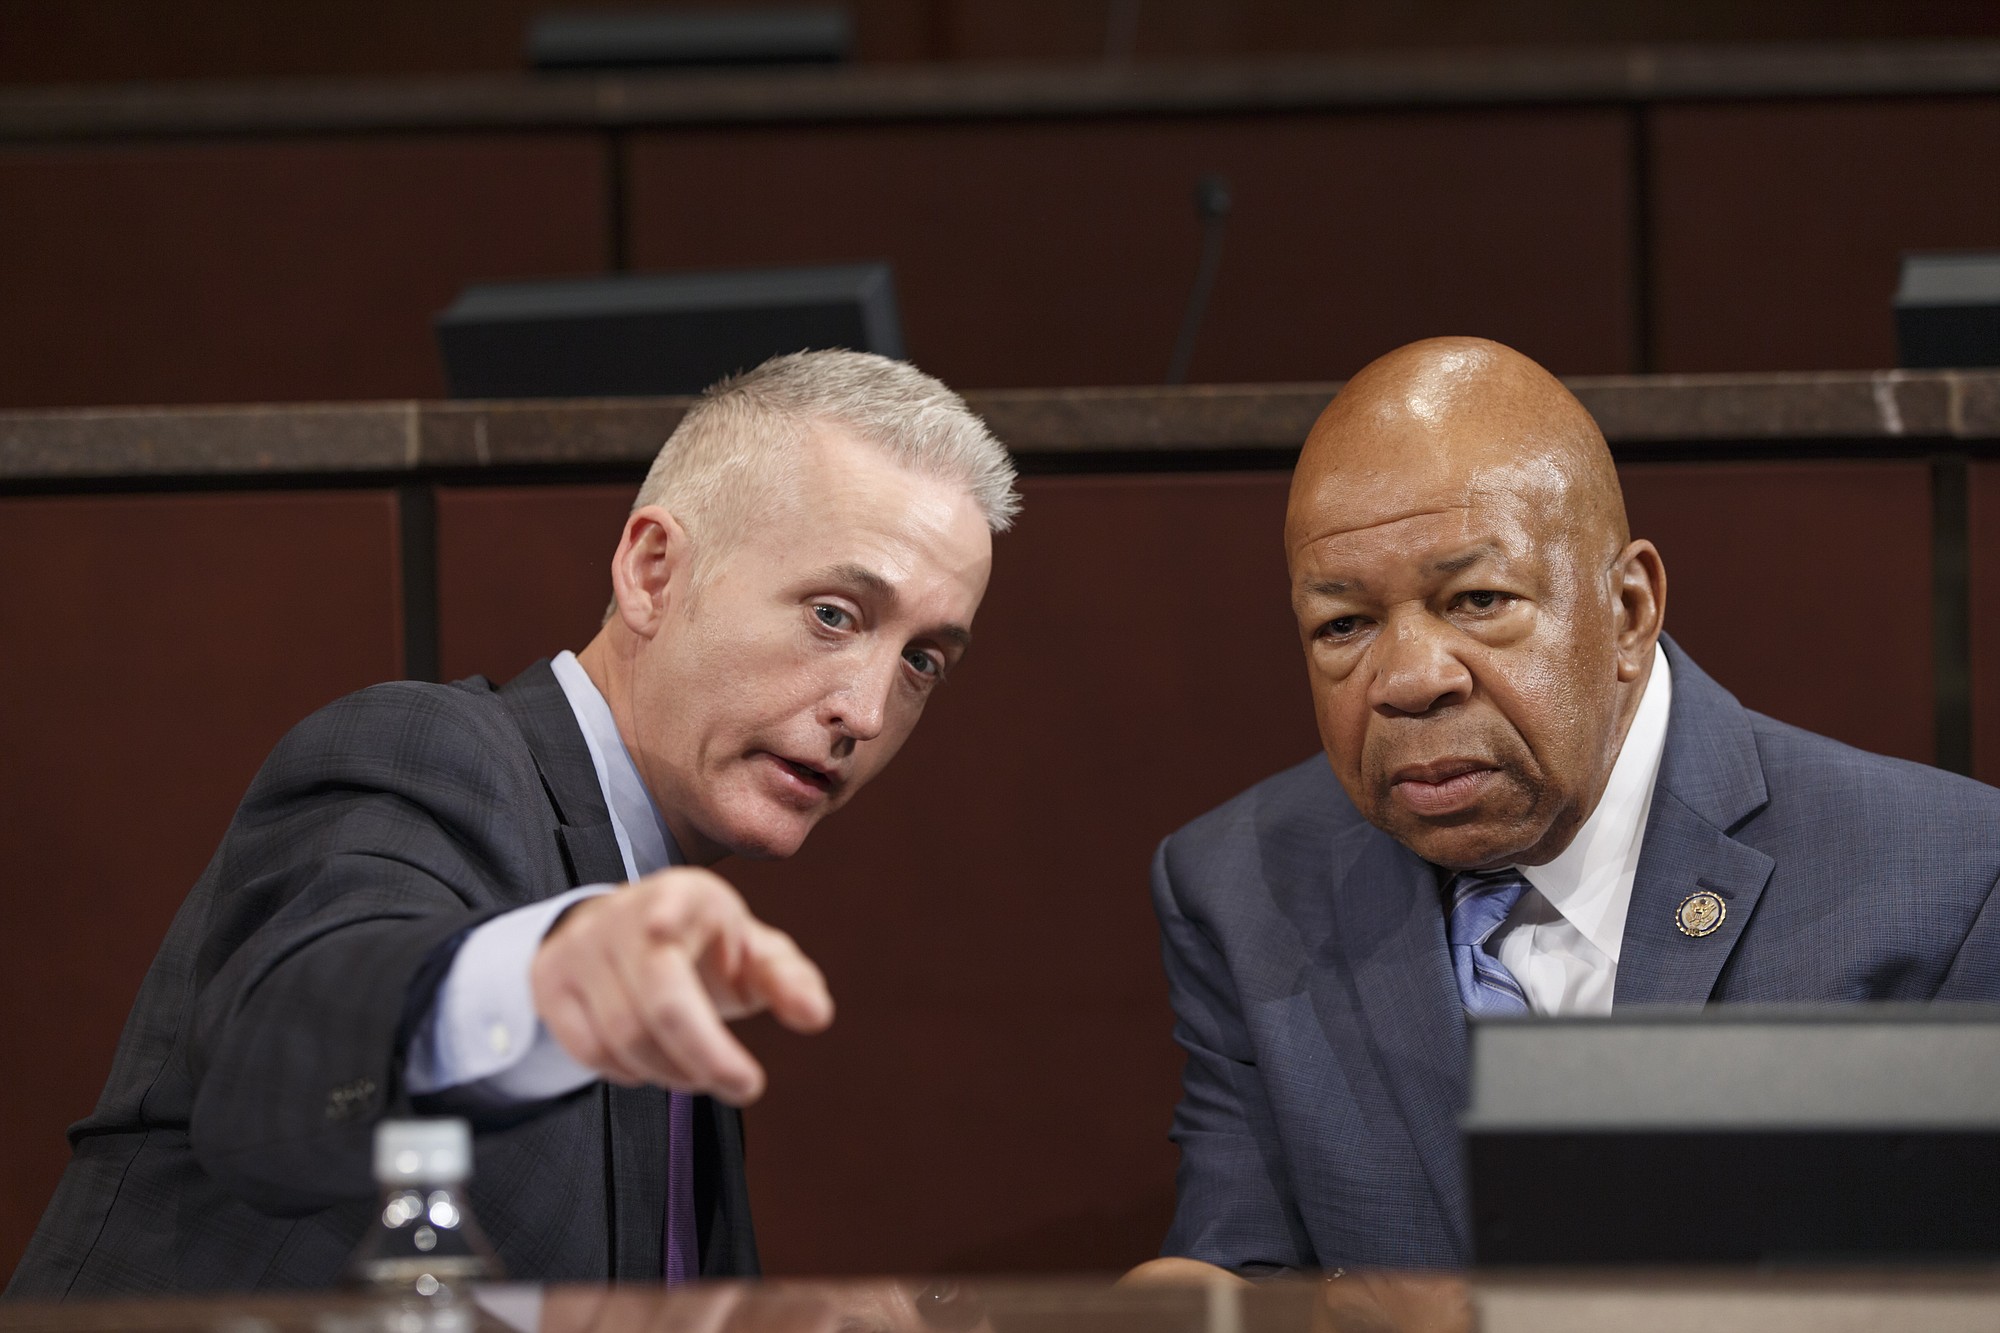 Associated Press files
Rep. Trey Gowdy, R-S.C., chairman of the House Select Committee on Benghazi, and Rep. Elijah Cummings, D-Md., the ranking member, confer as the panel holds its first public hearing on Sept. 17.